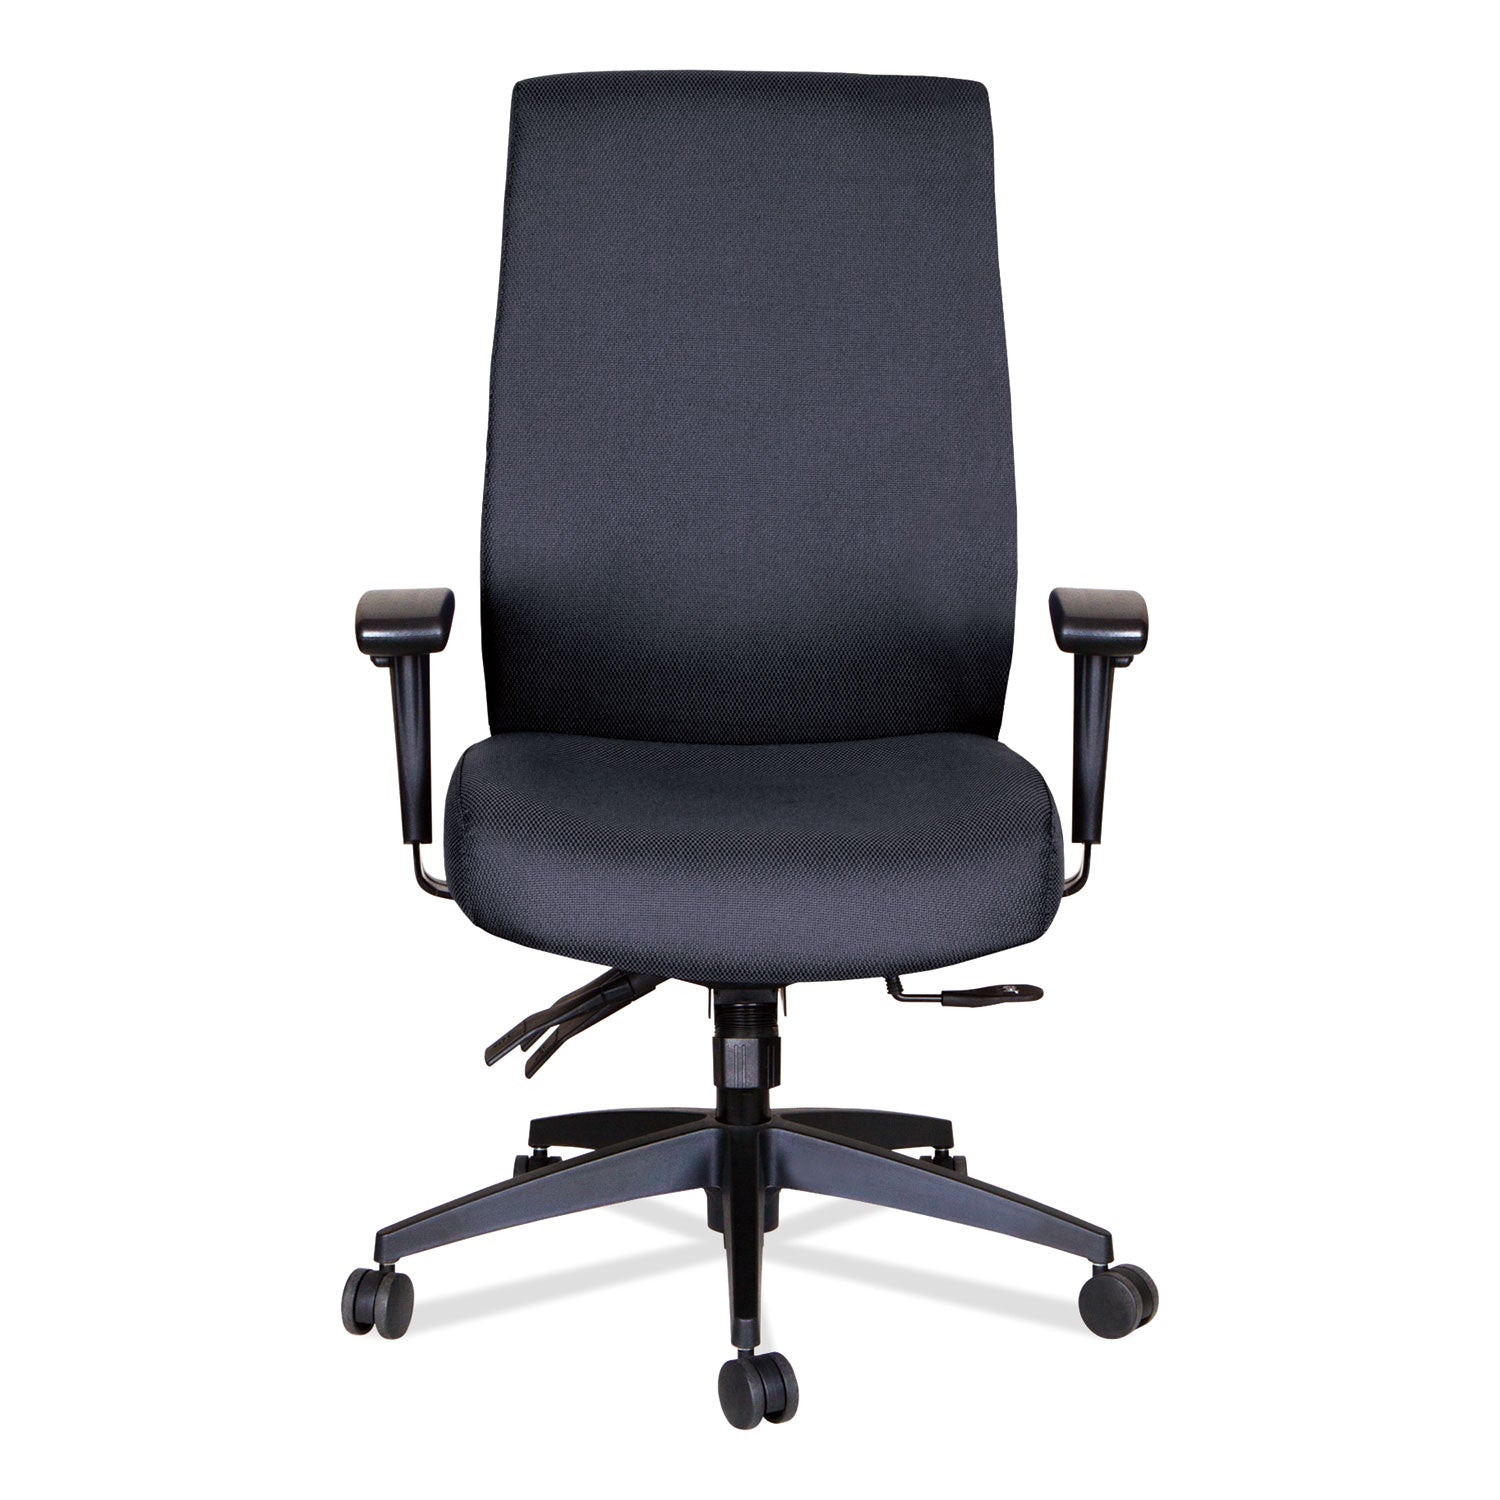 alera-wrigley-series-high-performance-high-back-multifunction-task-chair-supports-275-lb-187-to-2224-seat-height-black_alehpm4101 - 6